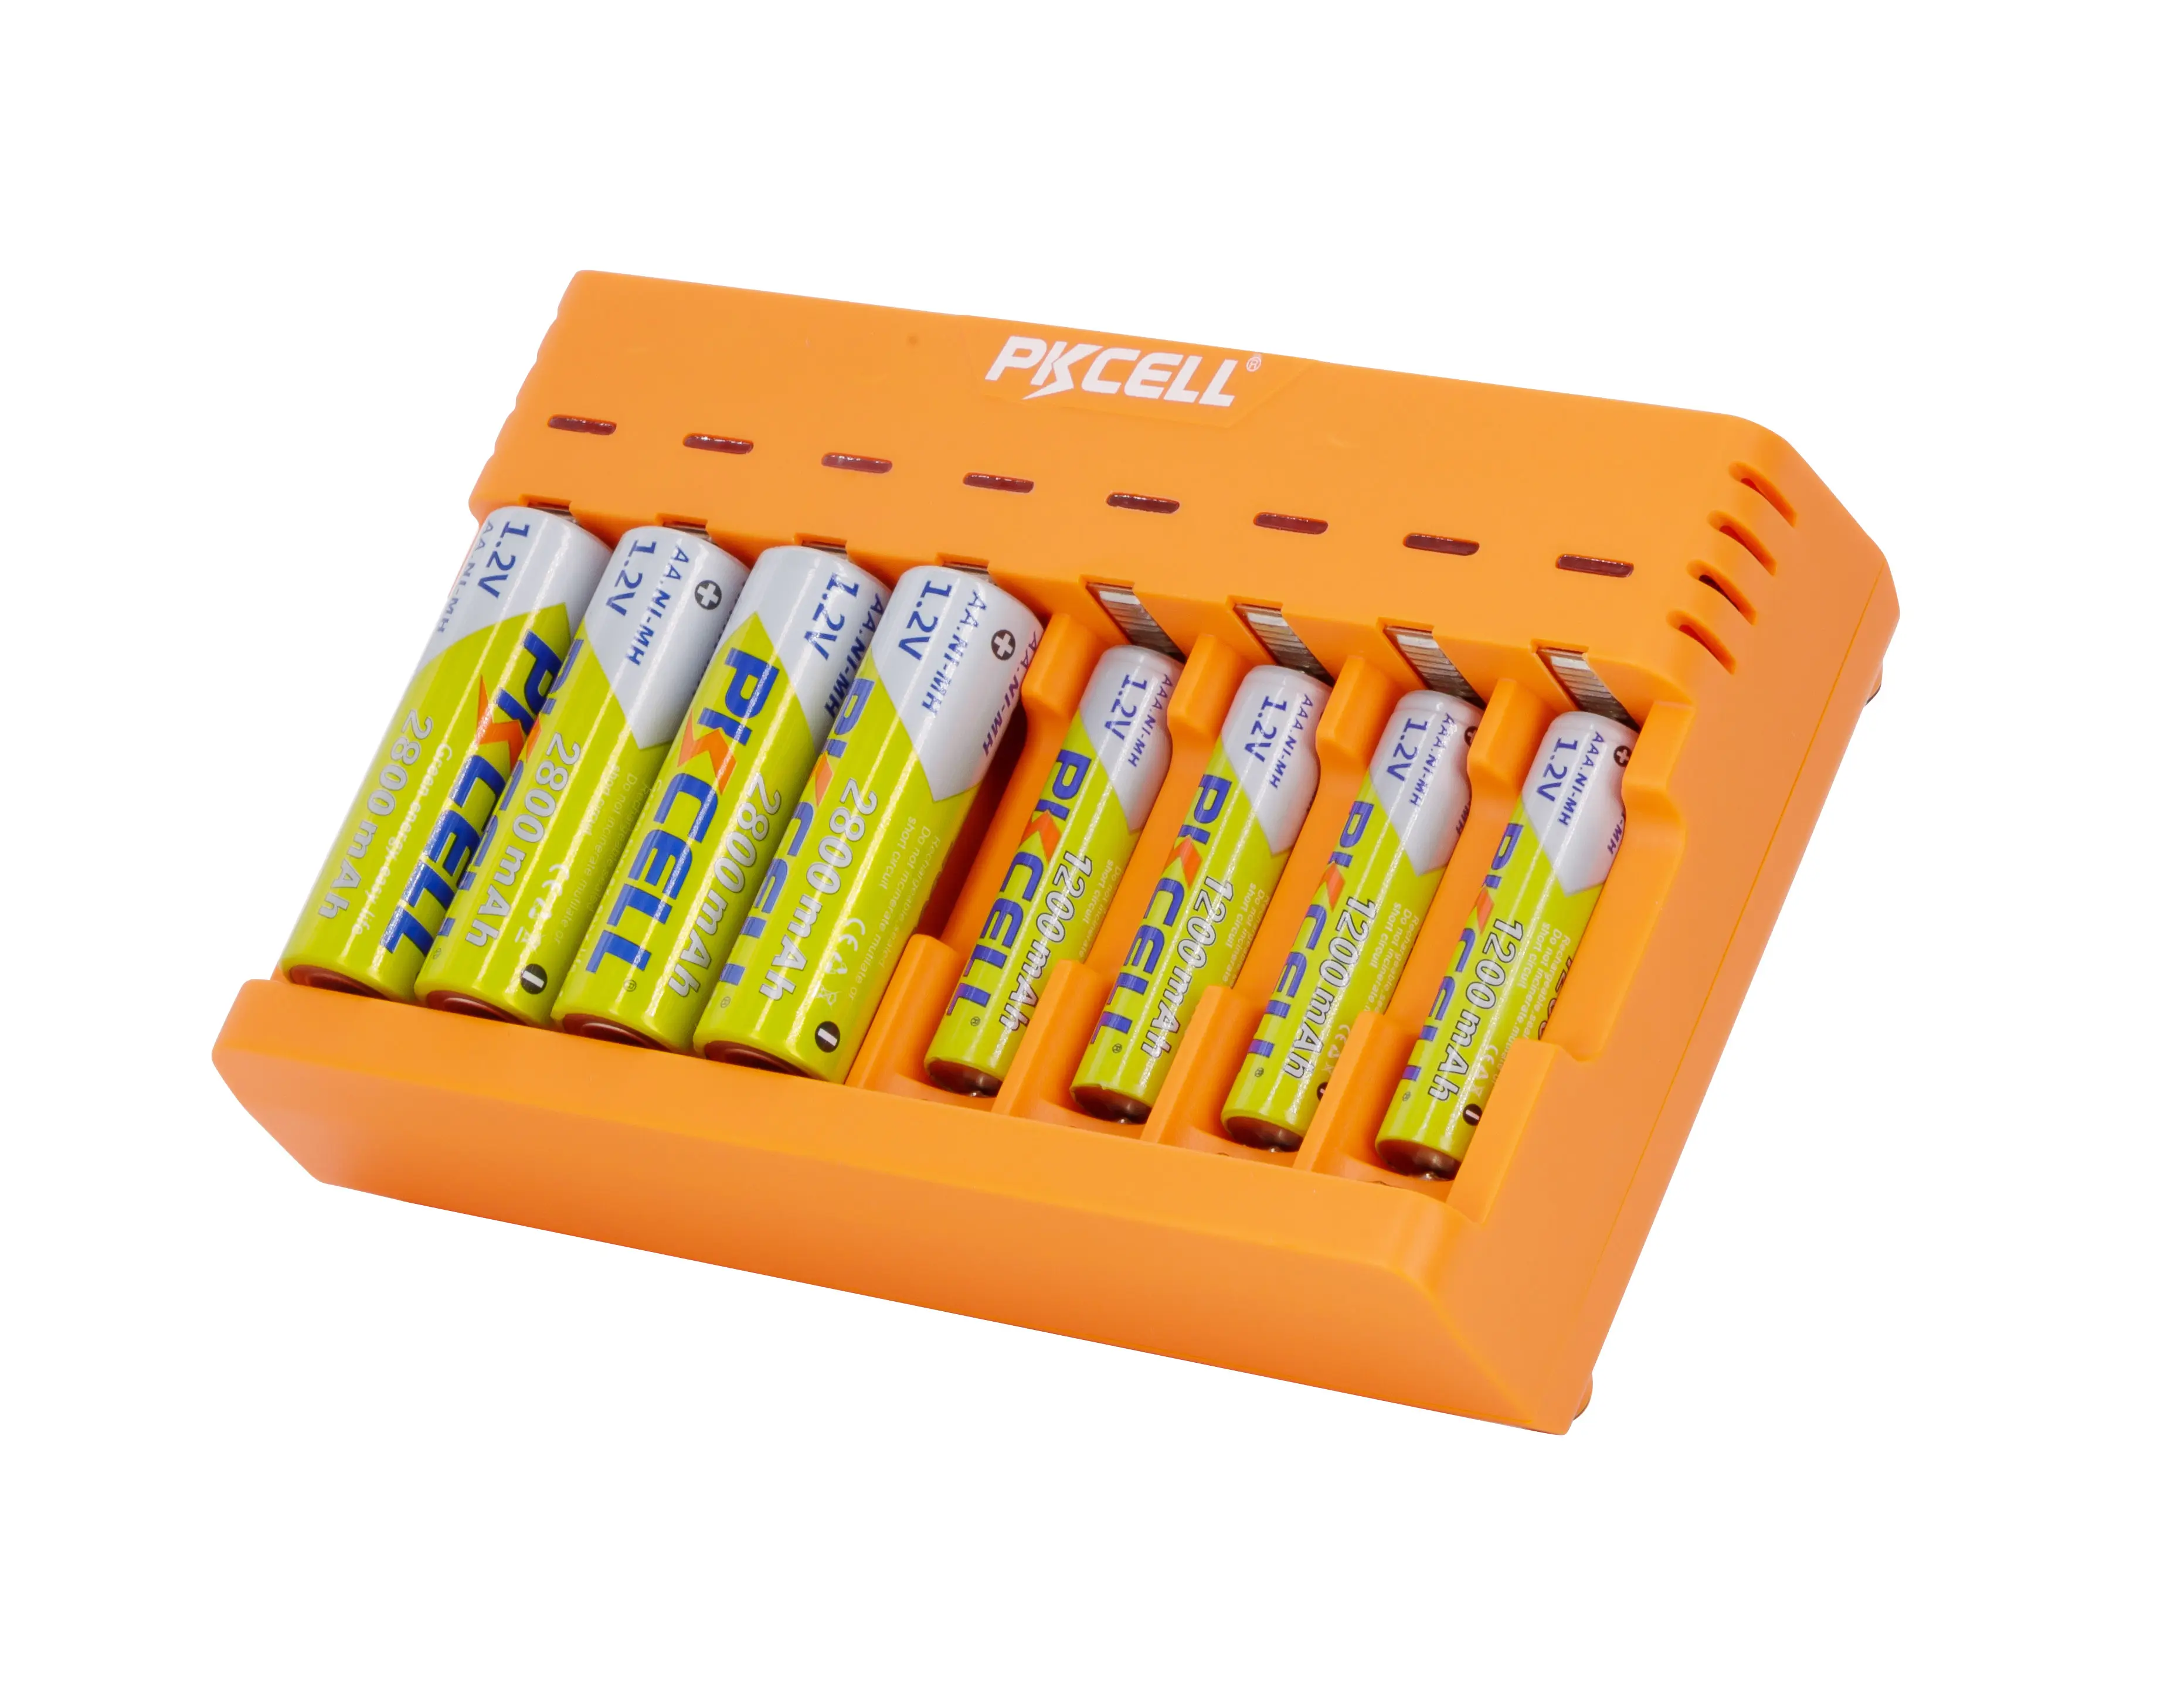 PKCELL Brand Nimh Battery Charger AA AAA Size Portable Fast Cylindrical Battery Charger 8 Slot USB Cable